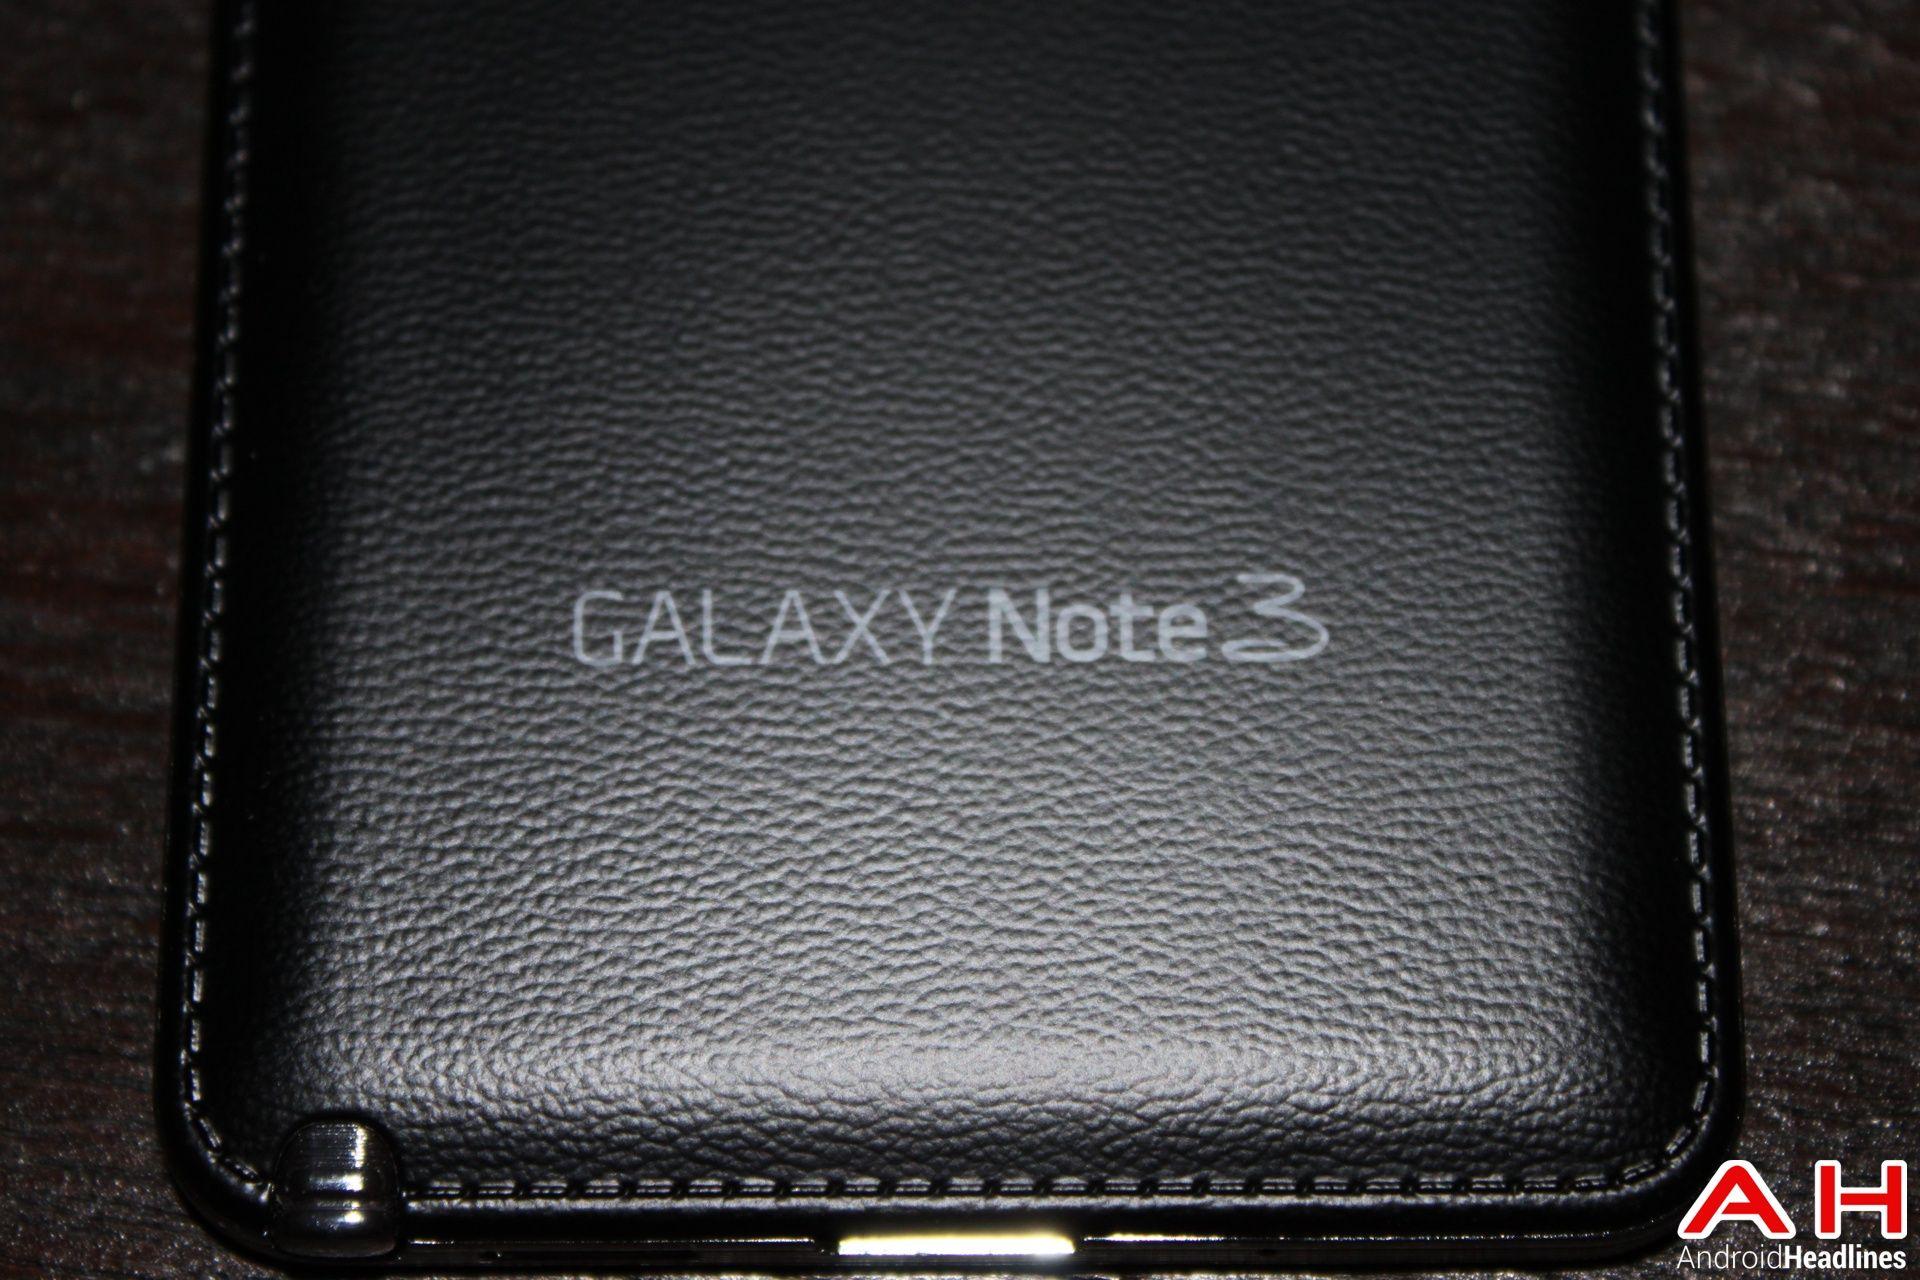 Samsung Galaxy Note 3 Logo - Verizon Sends out Lollipop for its Samsung Galaxy Note 3. Android